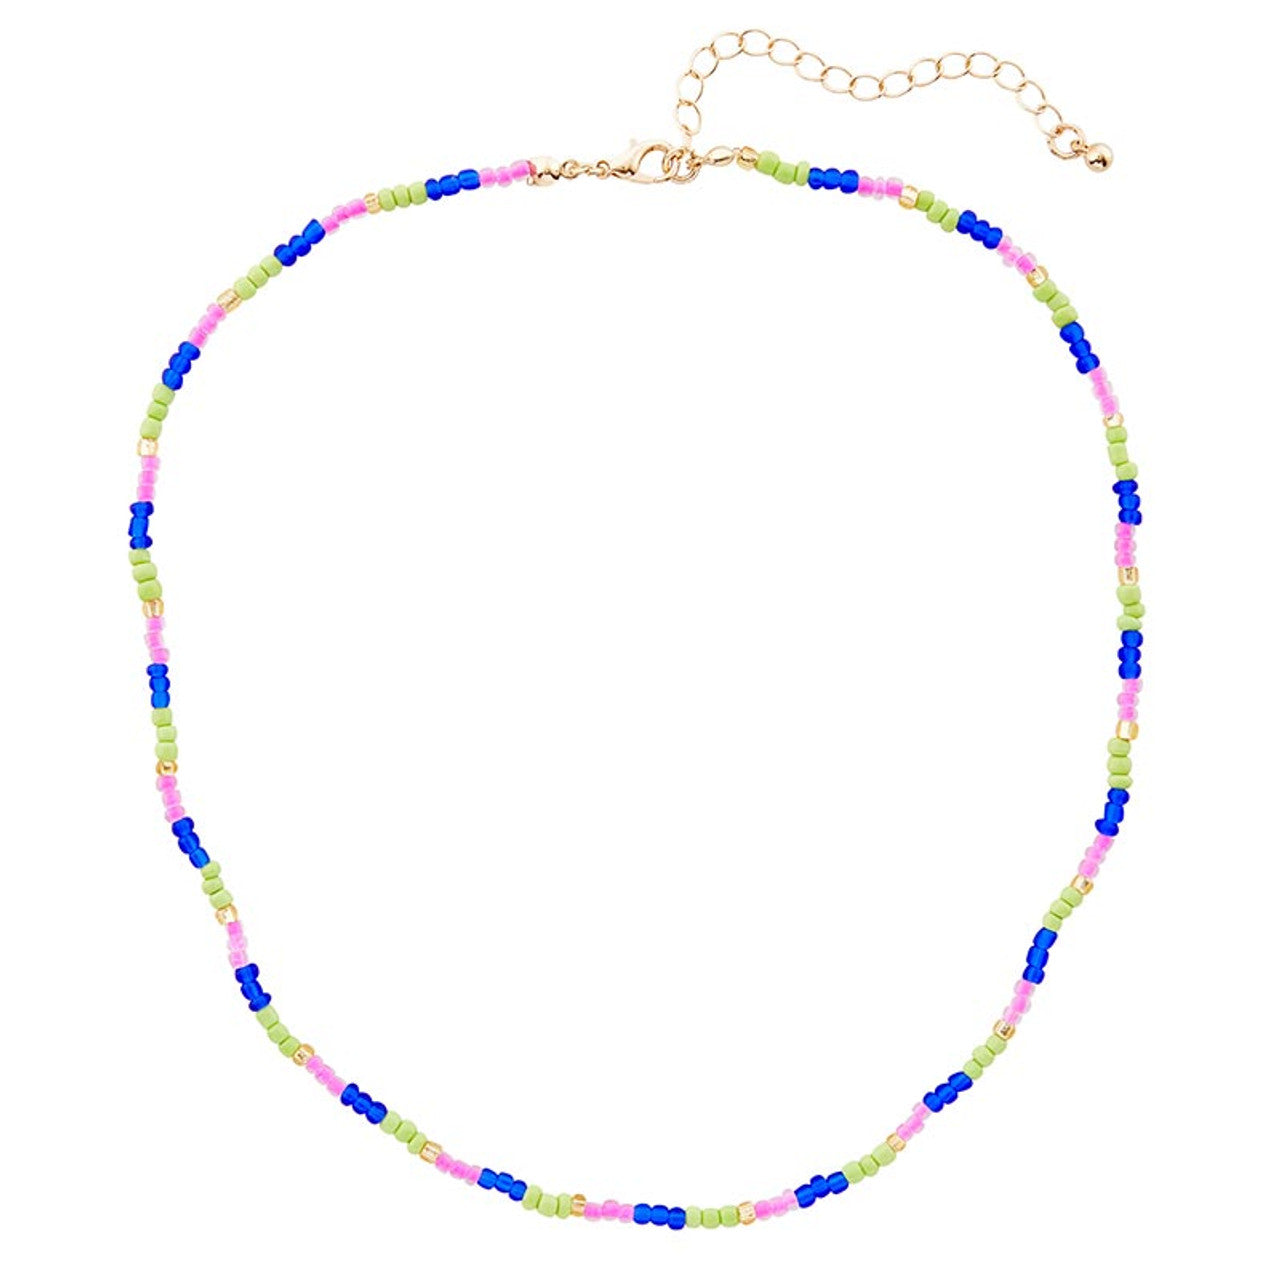 HBD Colorful Beaded Necklace | Giftable Birthday Party Necklace | 8"